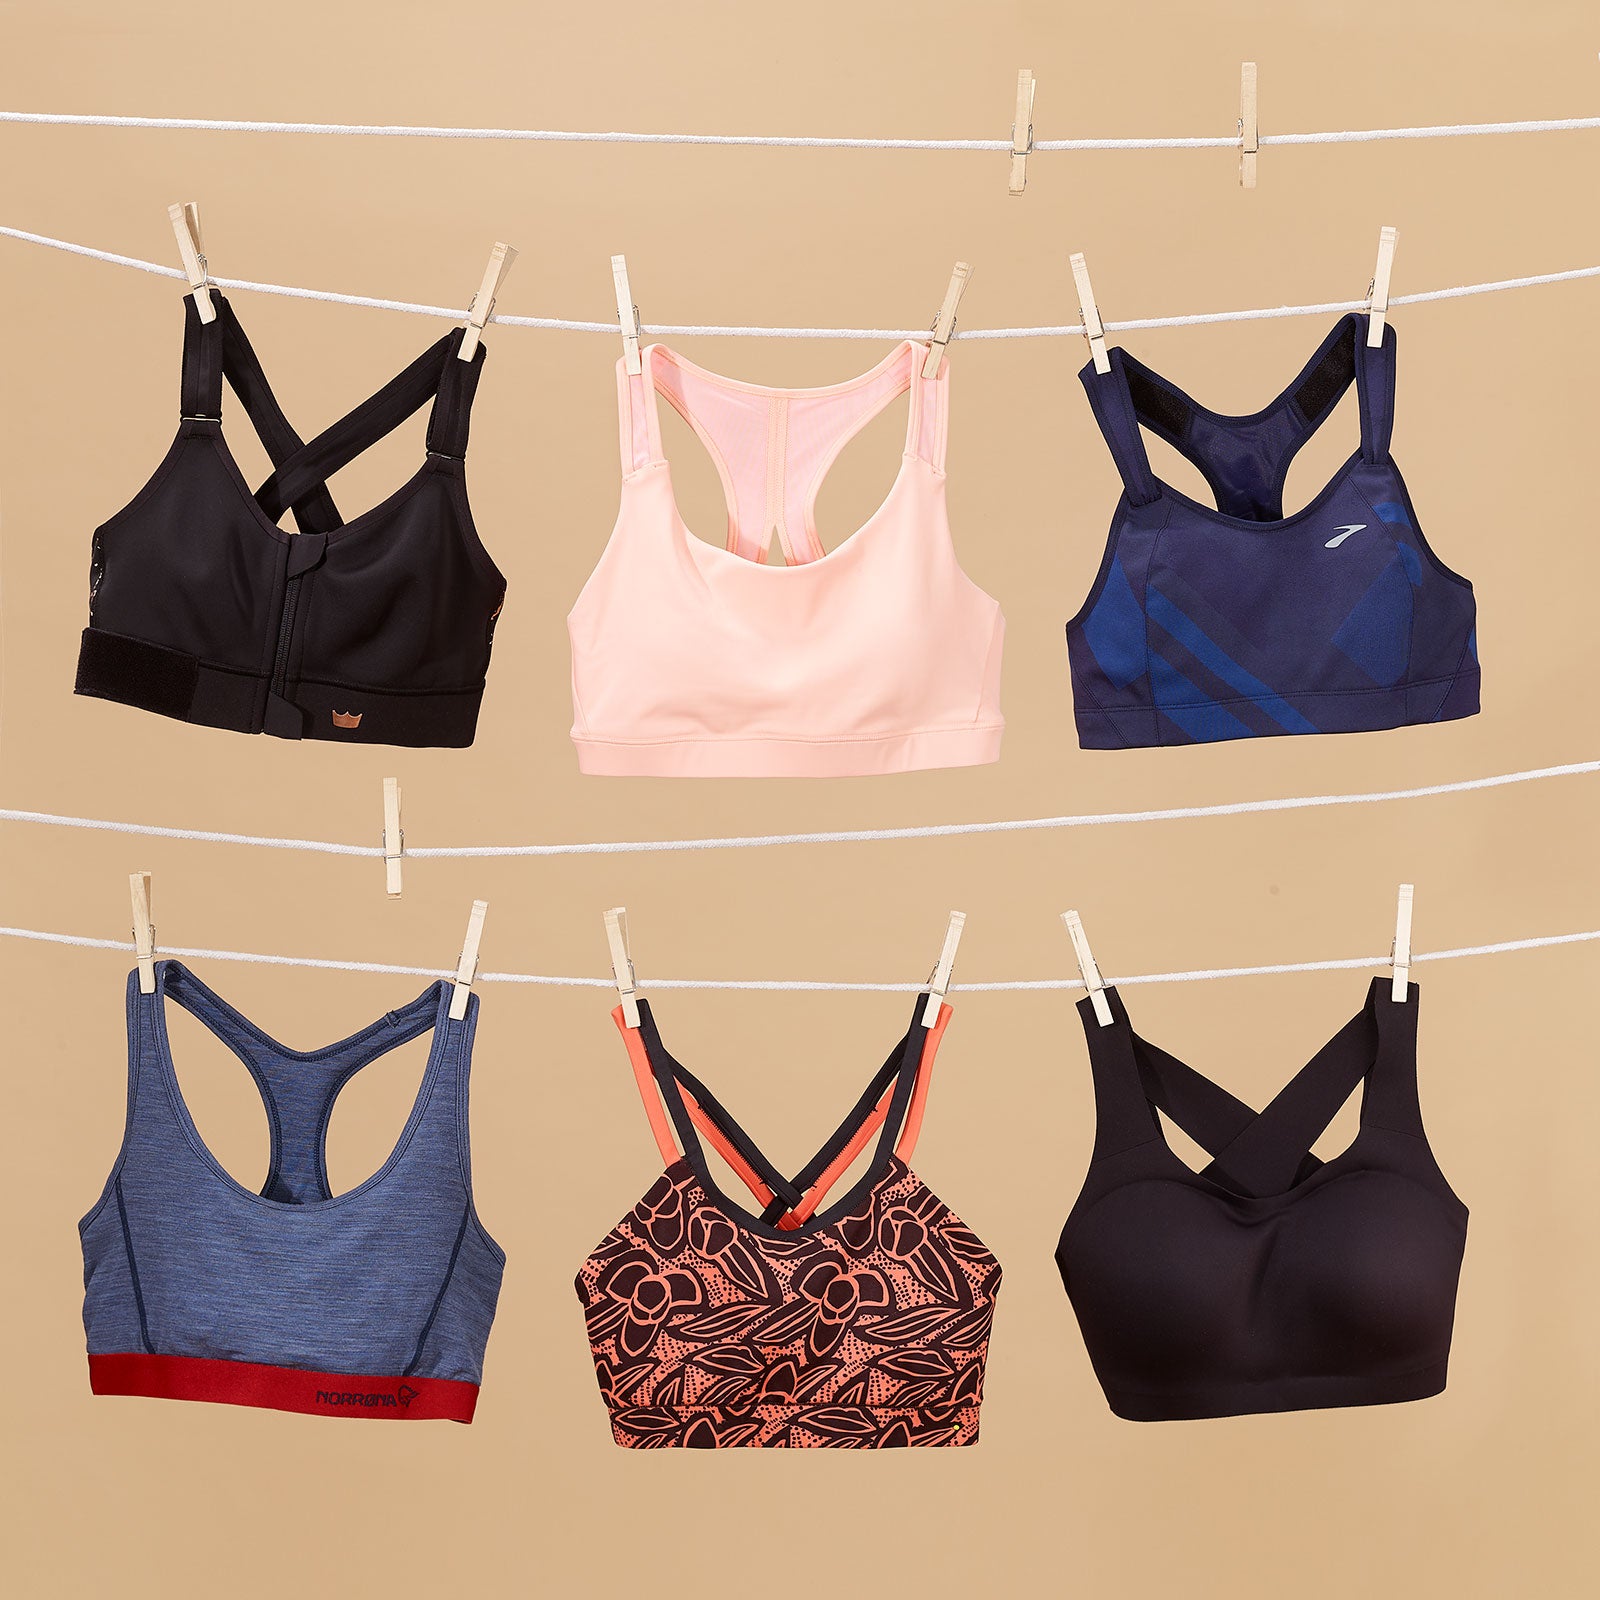 How to Find Your Body's Best Bra